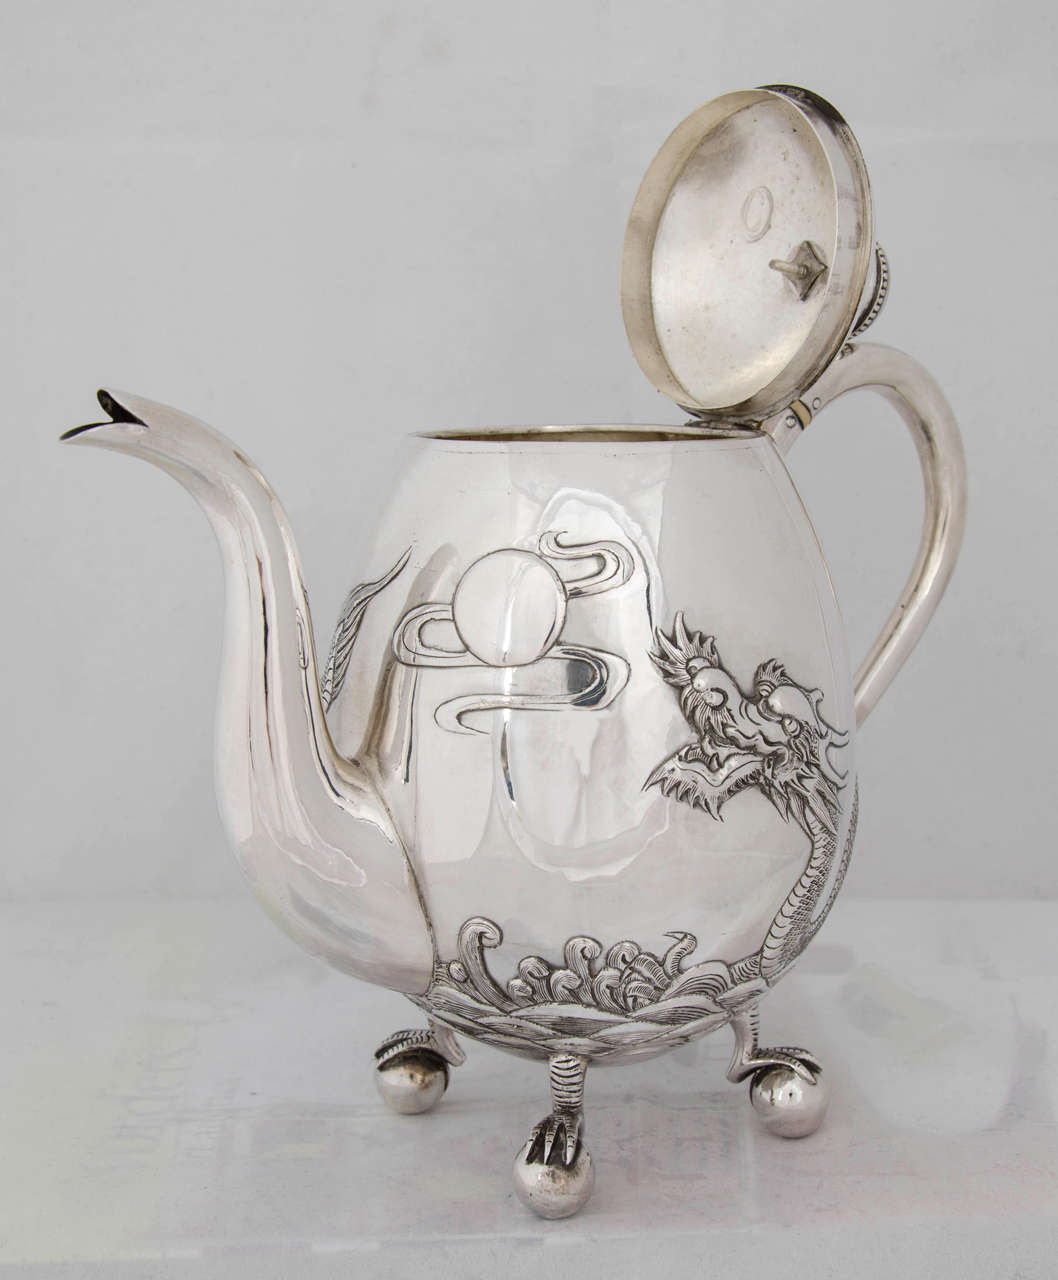 Chinese Export Silver Teaset 2